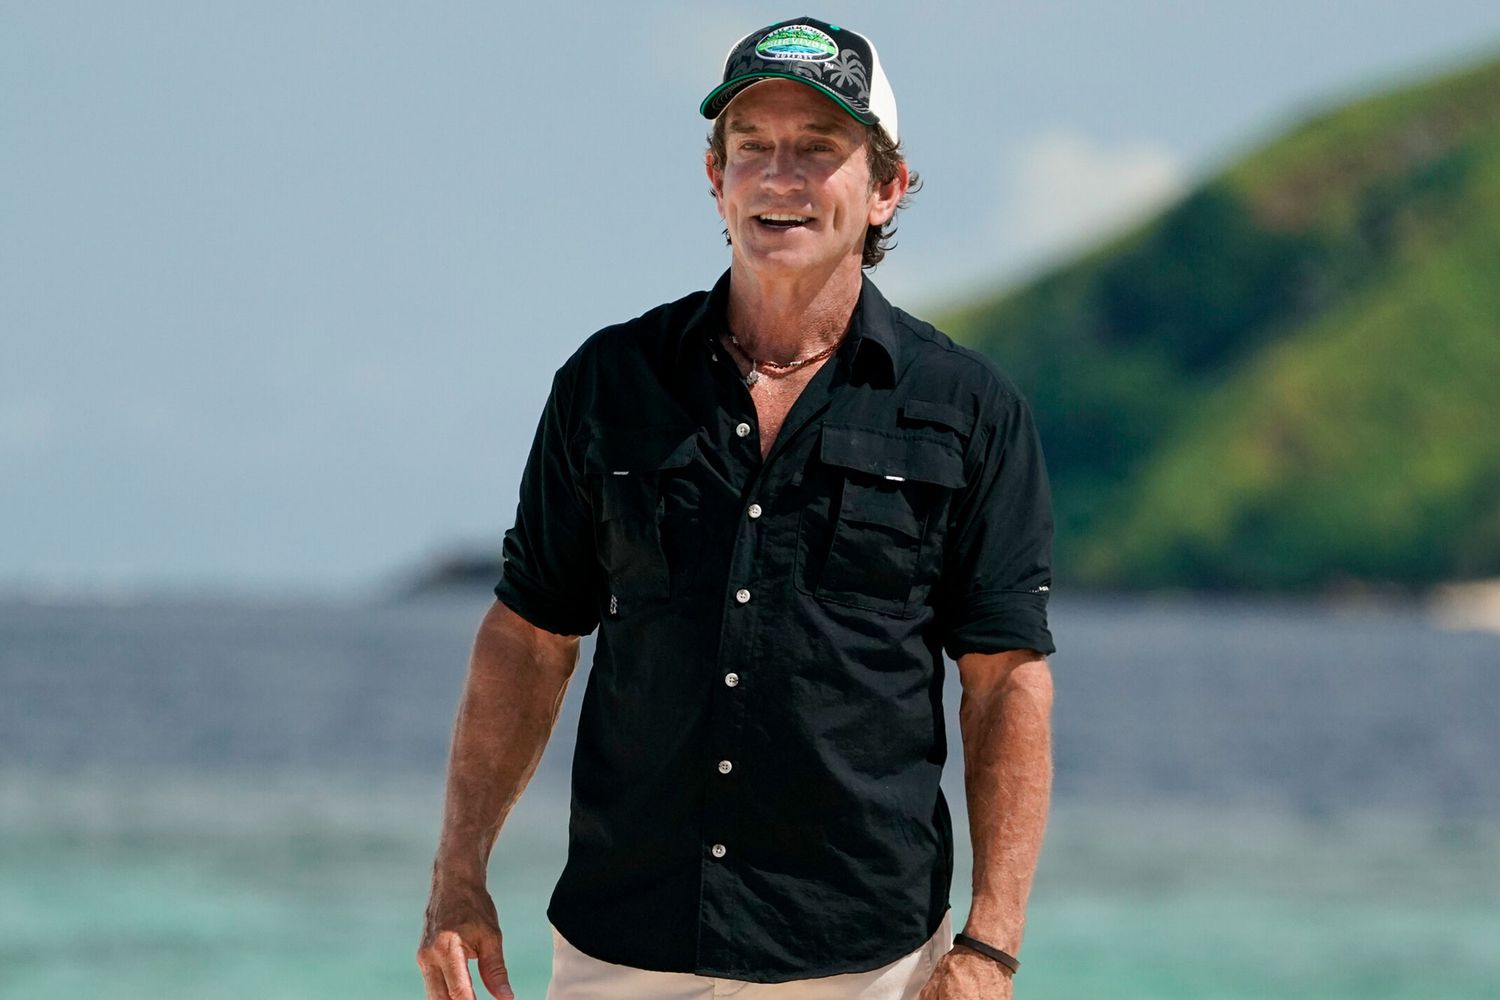 Jeff Probst says player outsmarted producers on 'Survivor' premiere - Entertainment Weekly News